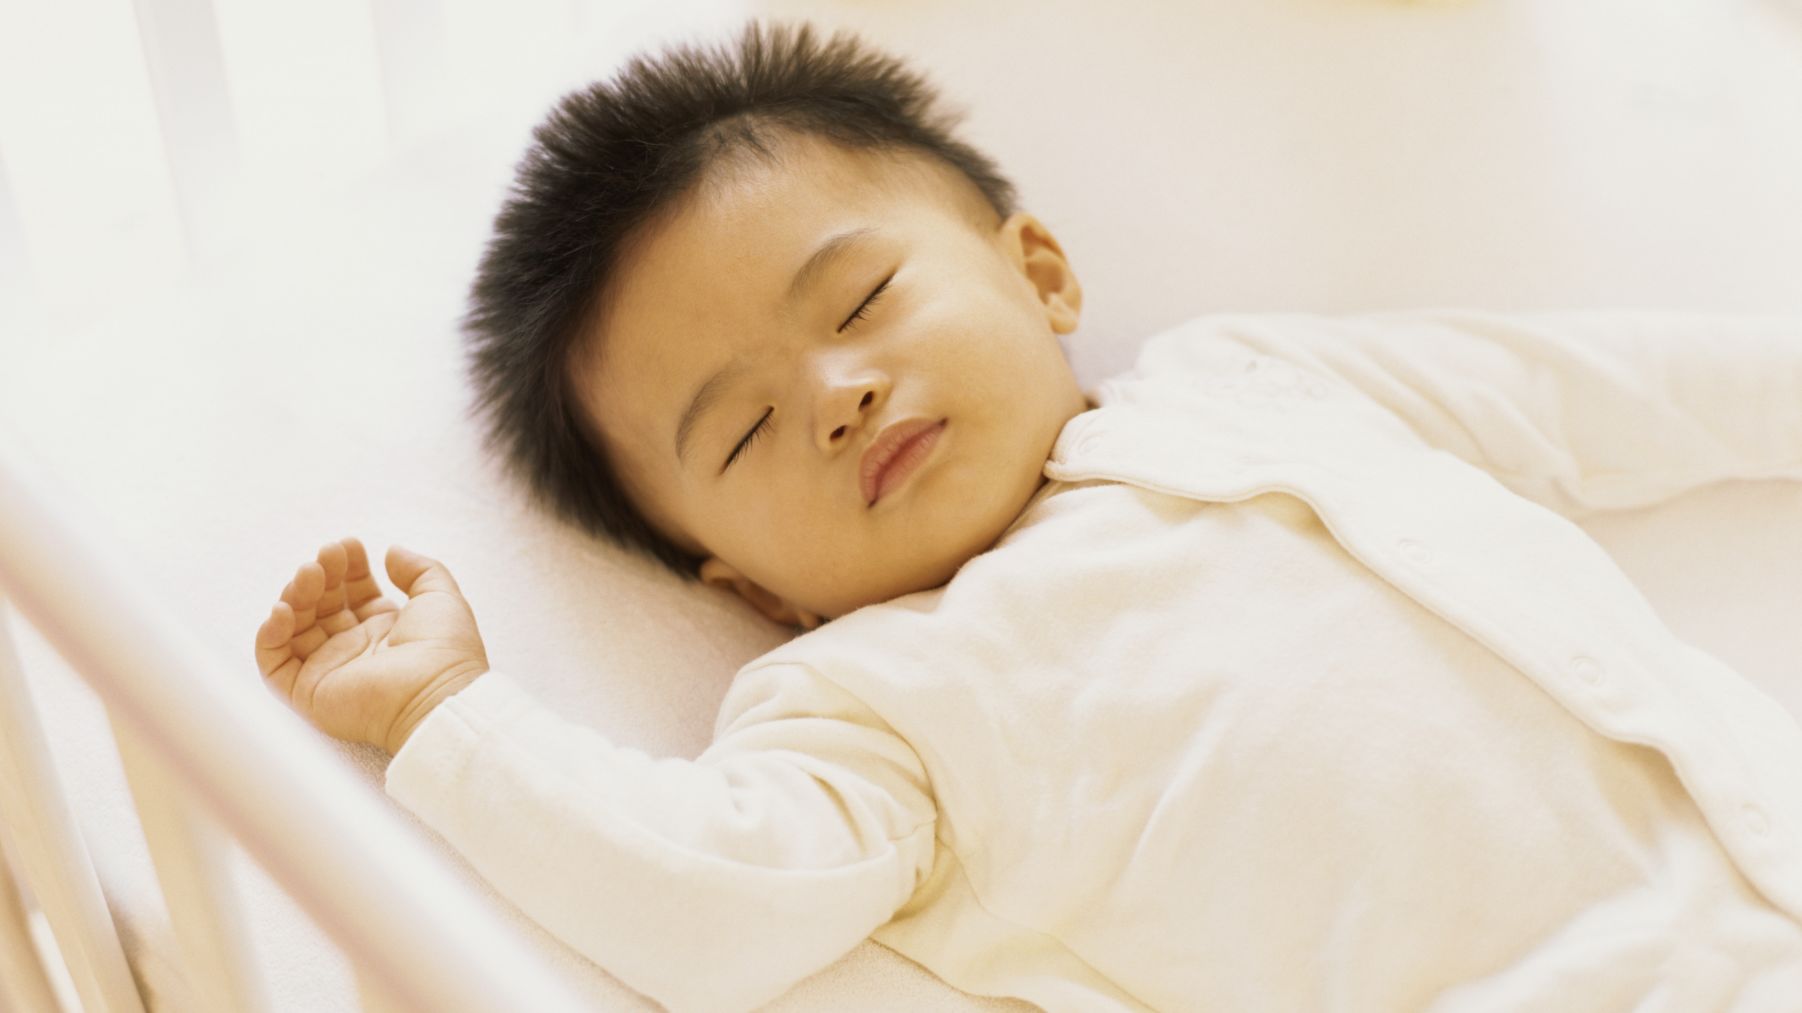 The AAP now recommends that infants sleep on their backs on a firm mattress, without any soft objects or loose bedding.